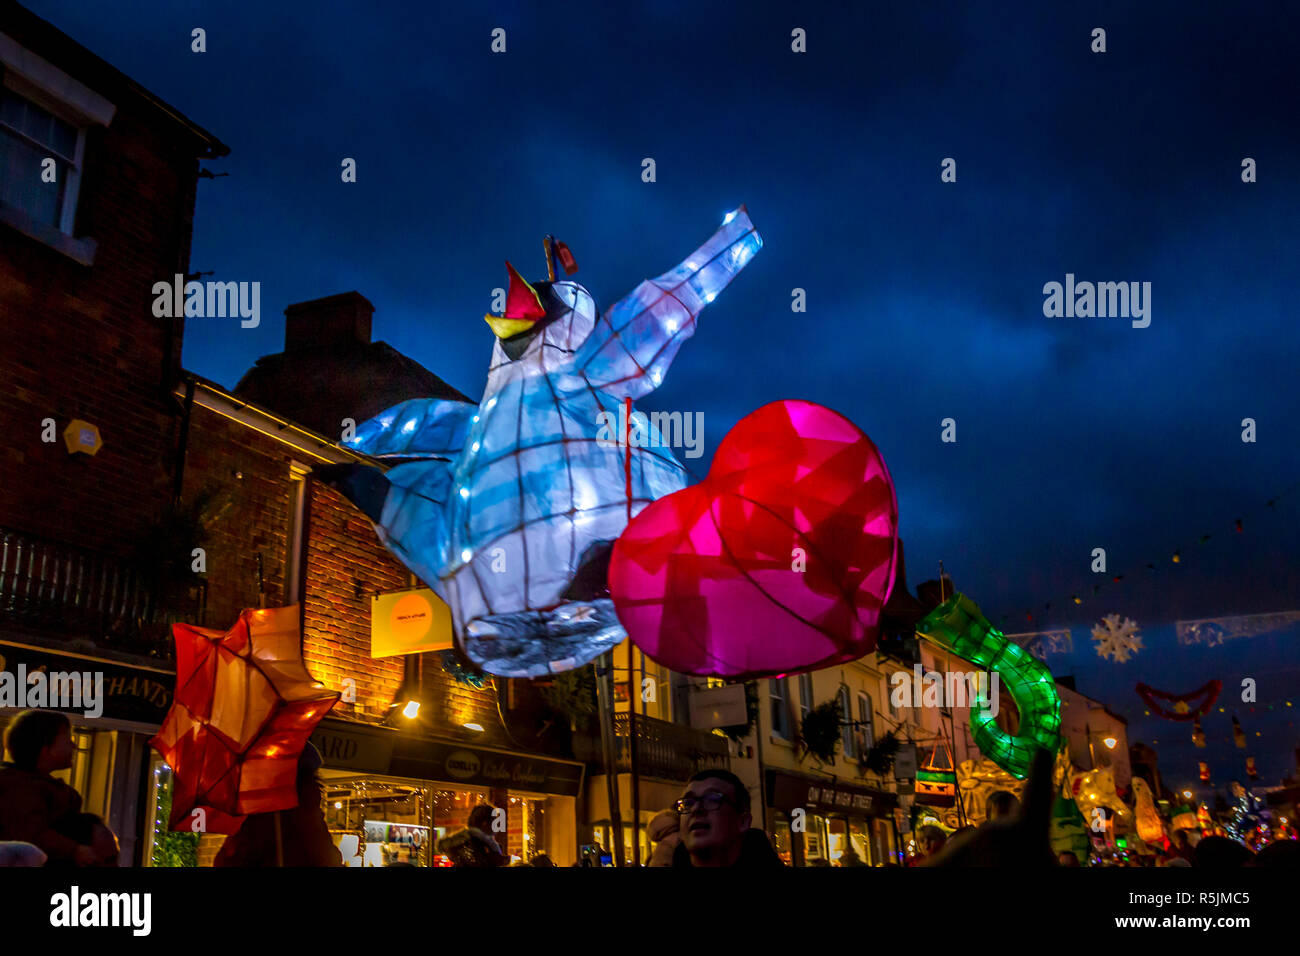 Stony Stratford. North Buckinghamshire, UK.1st December 2018. Lantern Parade with just over 280 lanterns, most of these have been made by families and young children at York House Centre, a Youth, Community and Arts centre over the last few months. The Lantern procession making its way down the packed hight street on it’s way to the Market Square, Credit: Keith J Smith./Alamy Live News Stock Photo